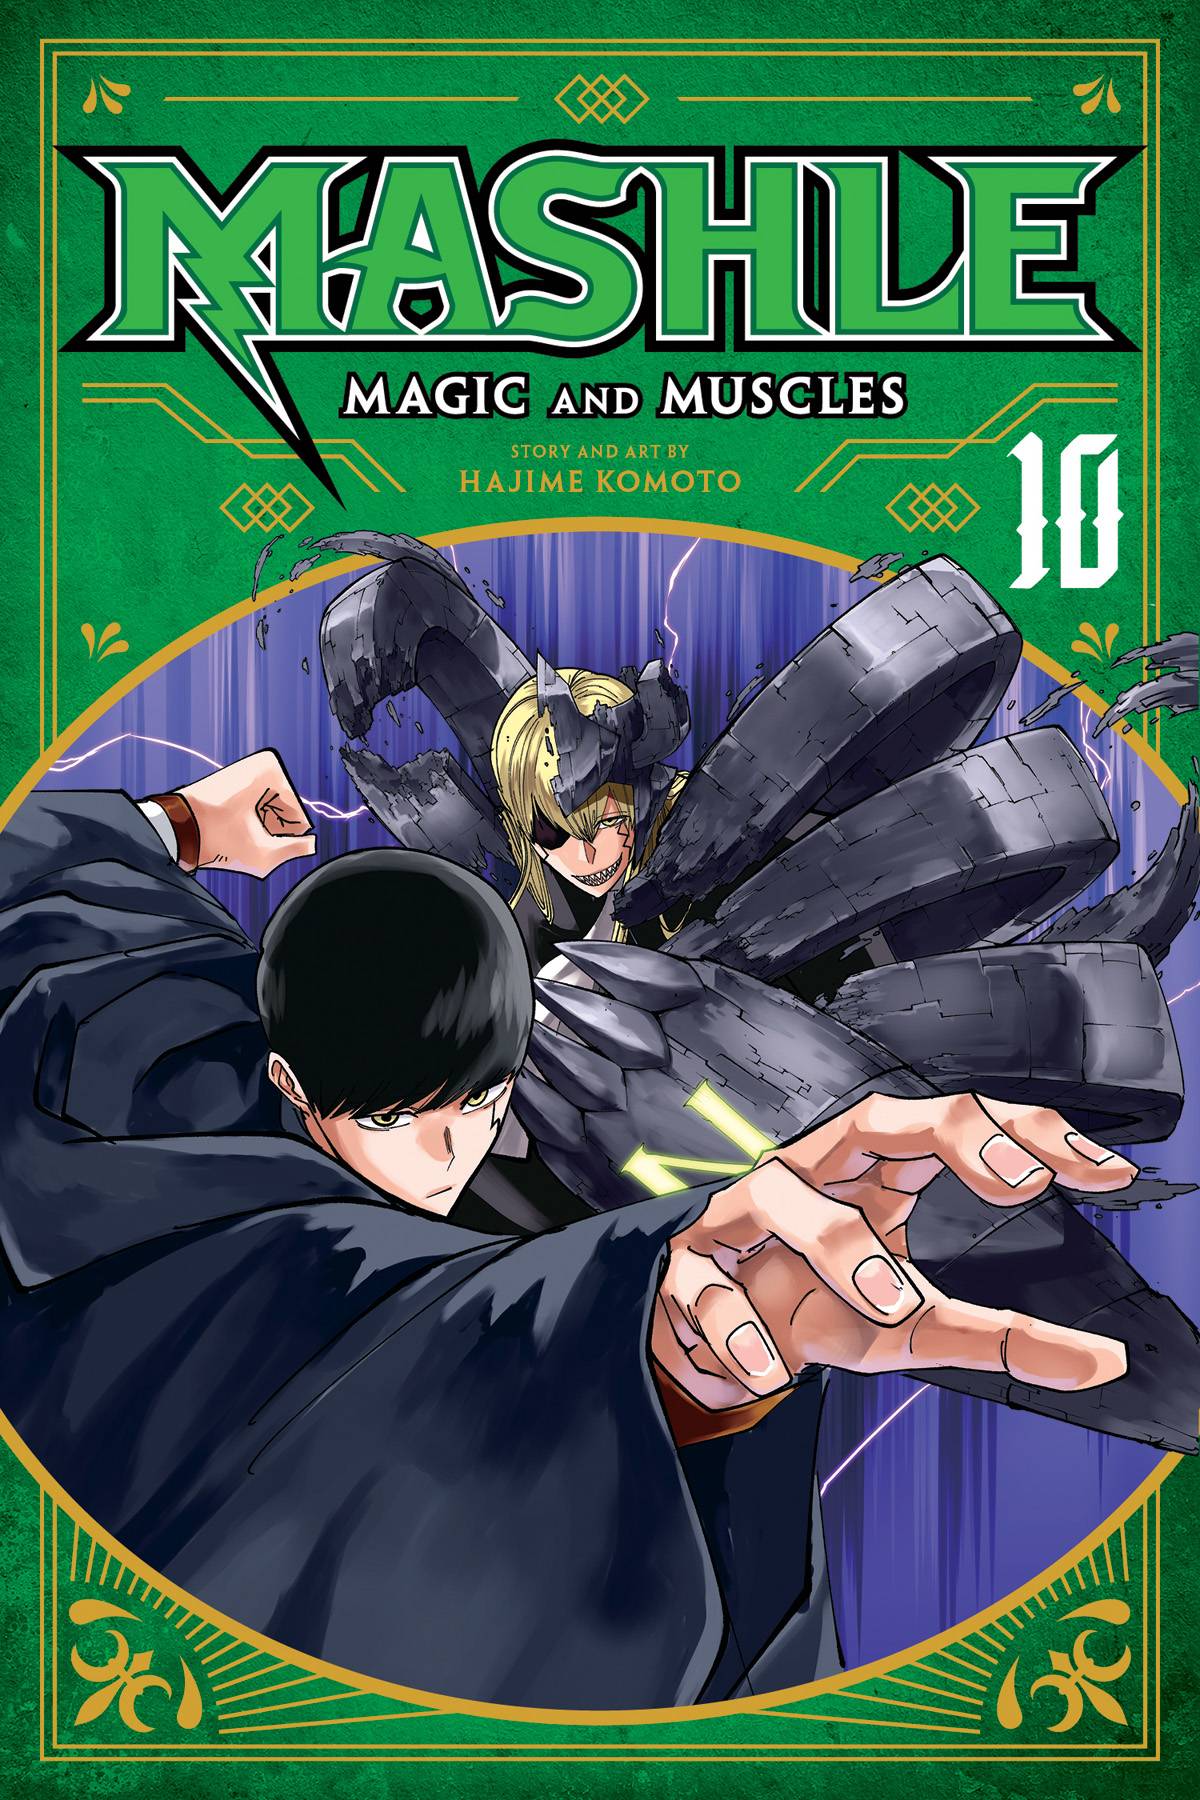 Mashle: Magic and Muscles Episode 10 Release Date and Time in 2023